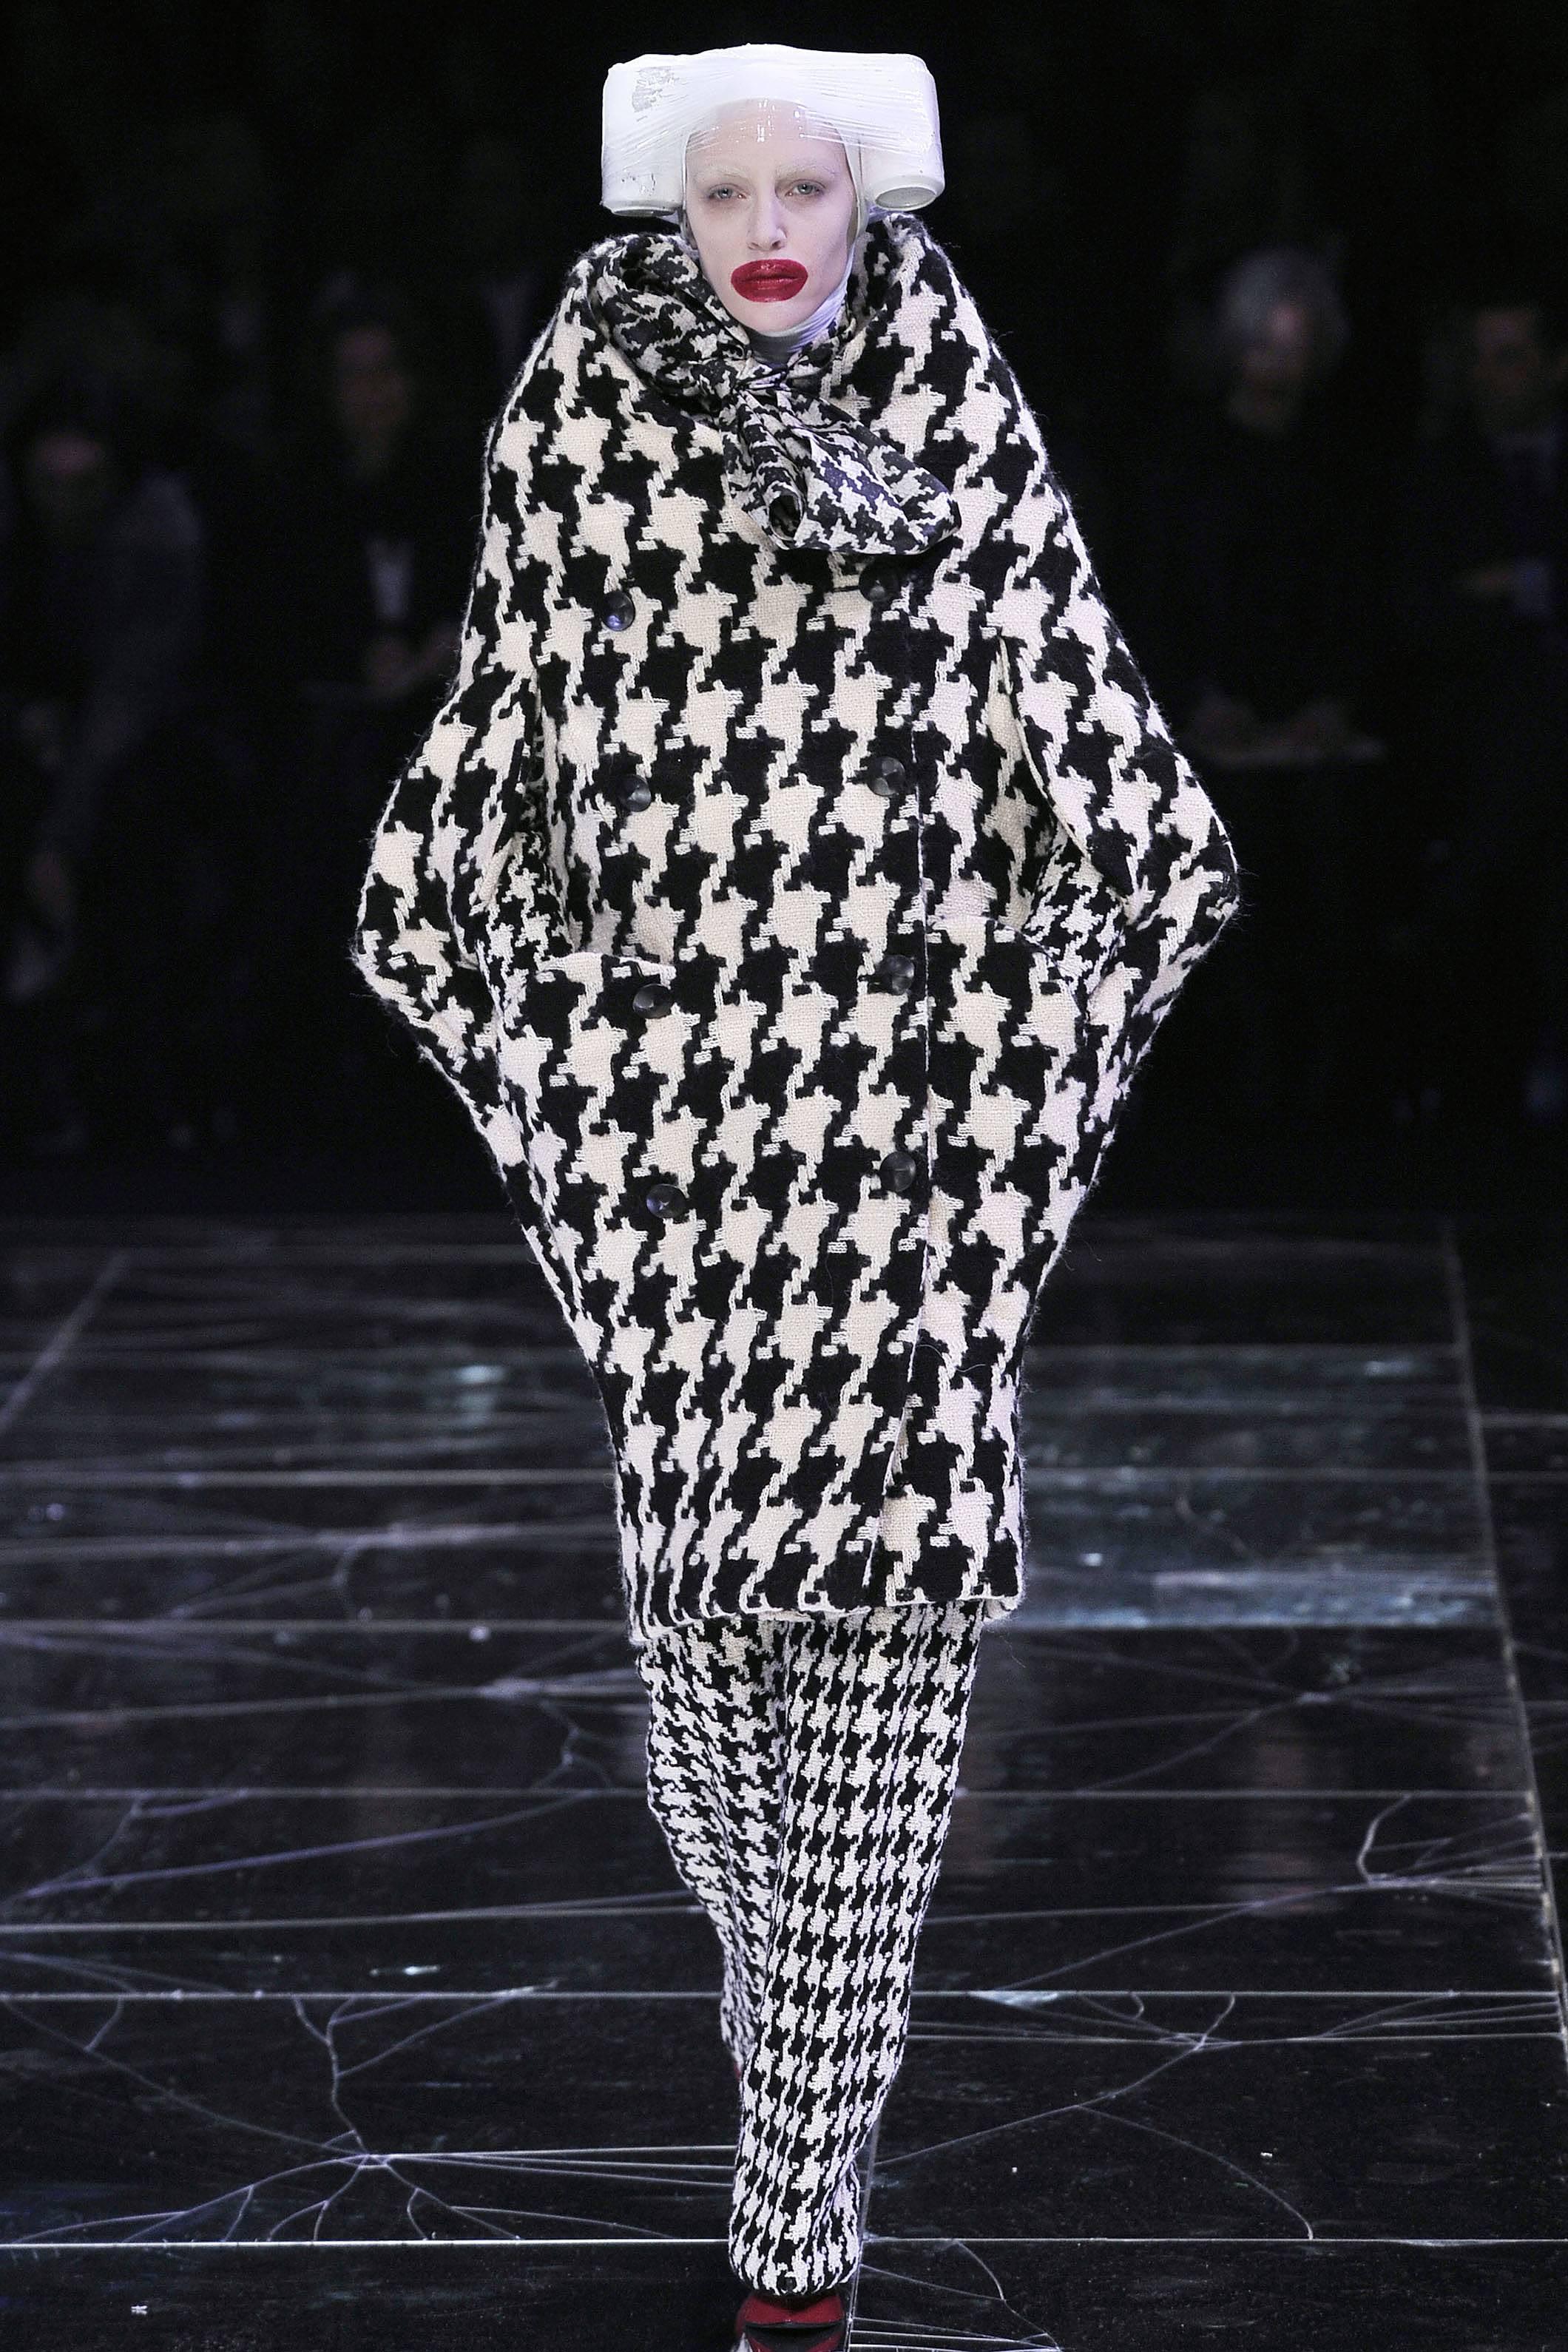 A rare and important vintage Alexander McQueen high collared black and white dogtooth check wool cocoon coat that was designed by the master McQueen himself. The coat can be worn high on the shoulders or slightly off. We have photographed the coat